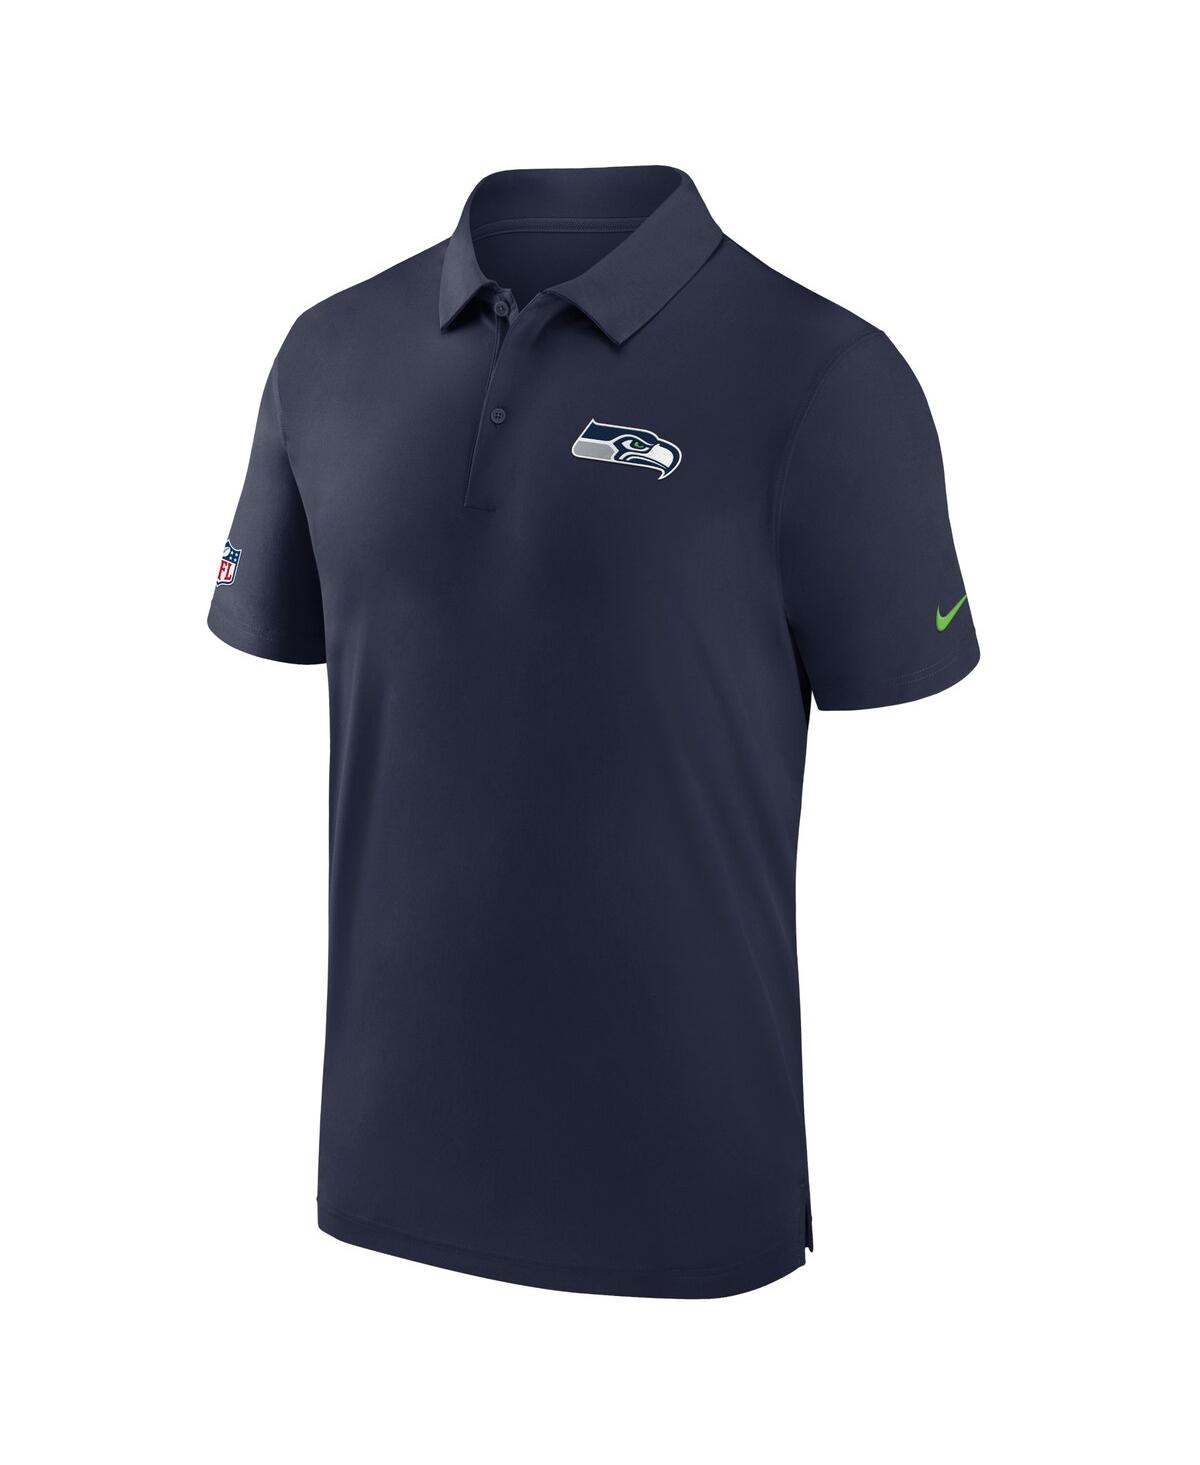 Shop Nike Men's  College Navy Seattle Seahawks Sideline Coaches Performance Polo Shirt